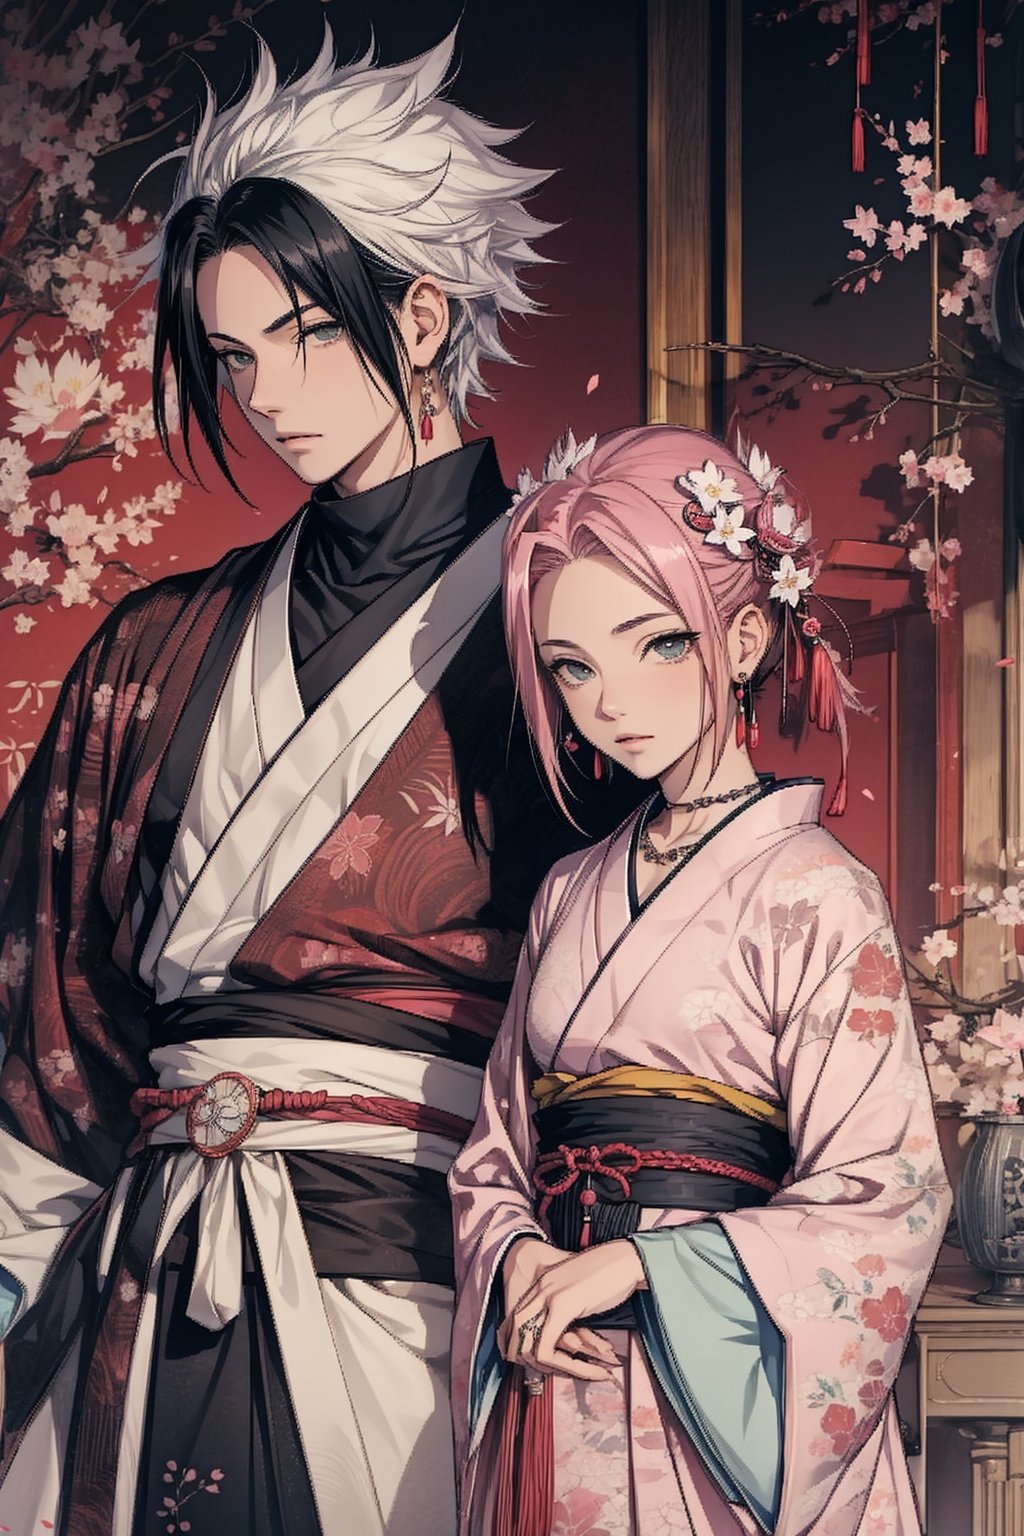 1girl with short pink hair and green eyes and small breast wearing japanese-style dress named Sakura Haruno, 1boy with black hair and black eyes named Sasuke Uchiha, both having hair ornaments and jewelry, necklace, wearing japanese-styled clothes, facing each other, couple, royalty, harunoshipp, Sasukeanime,Sasuke Uchiha, ancient japanese,ancient_beautiful, Japanese art